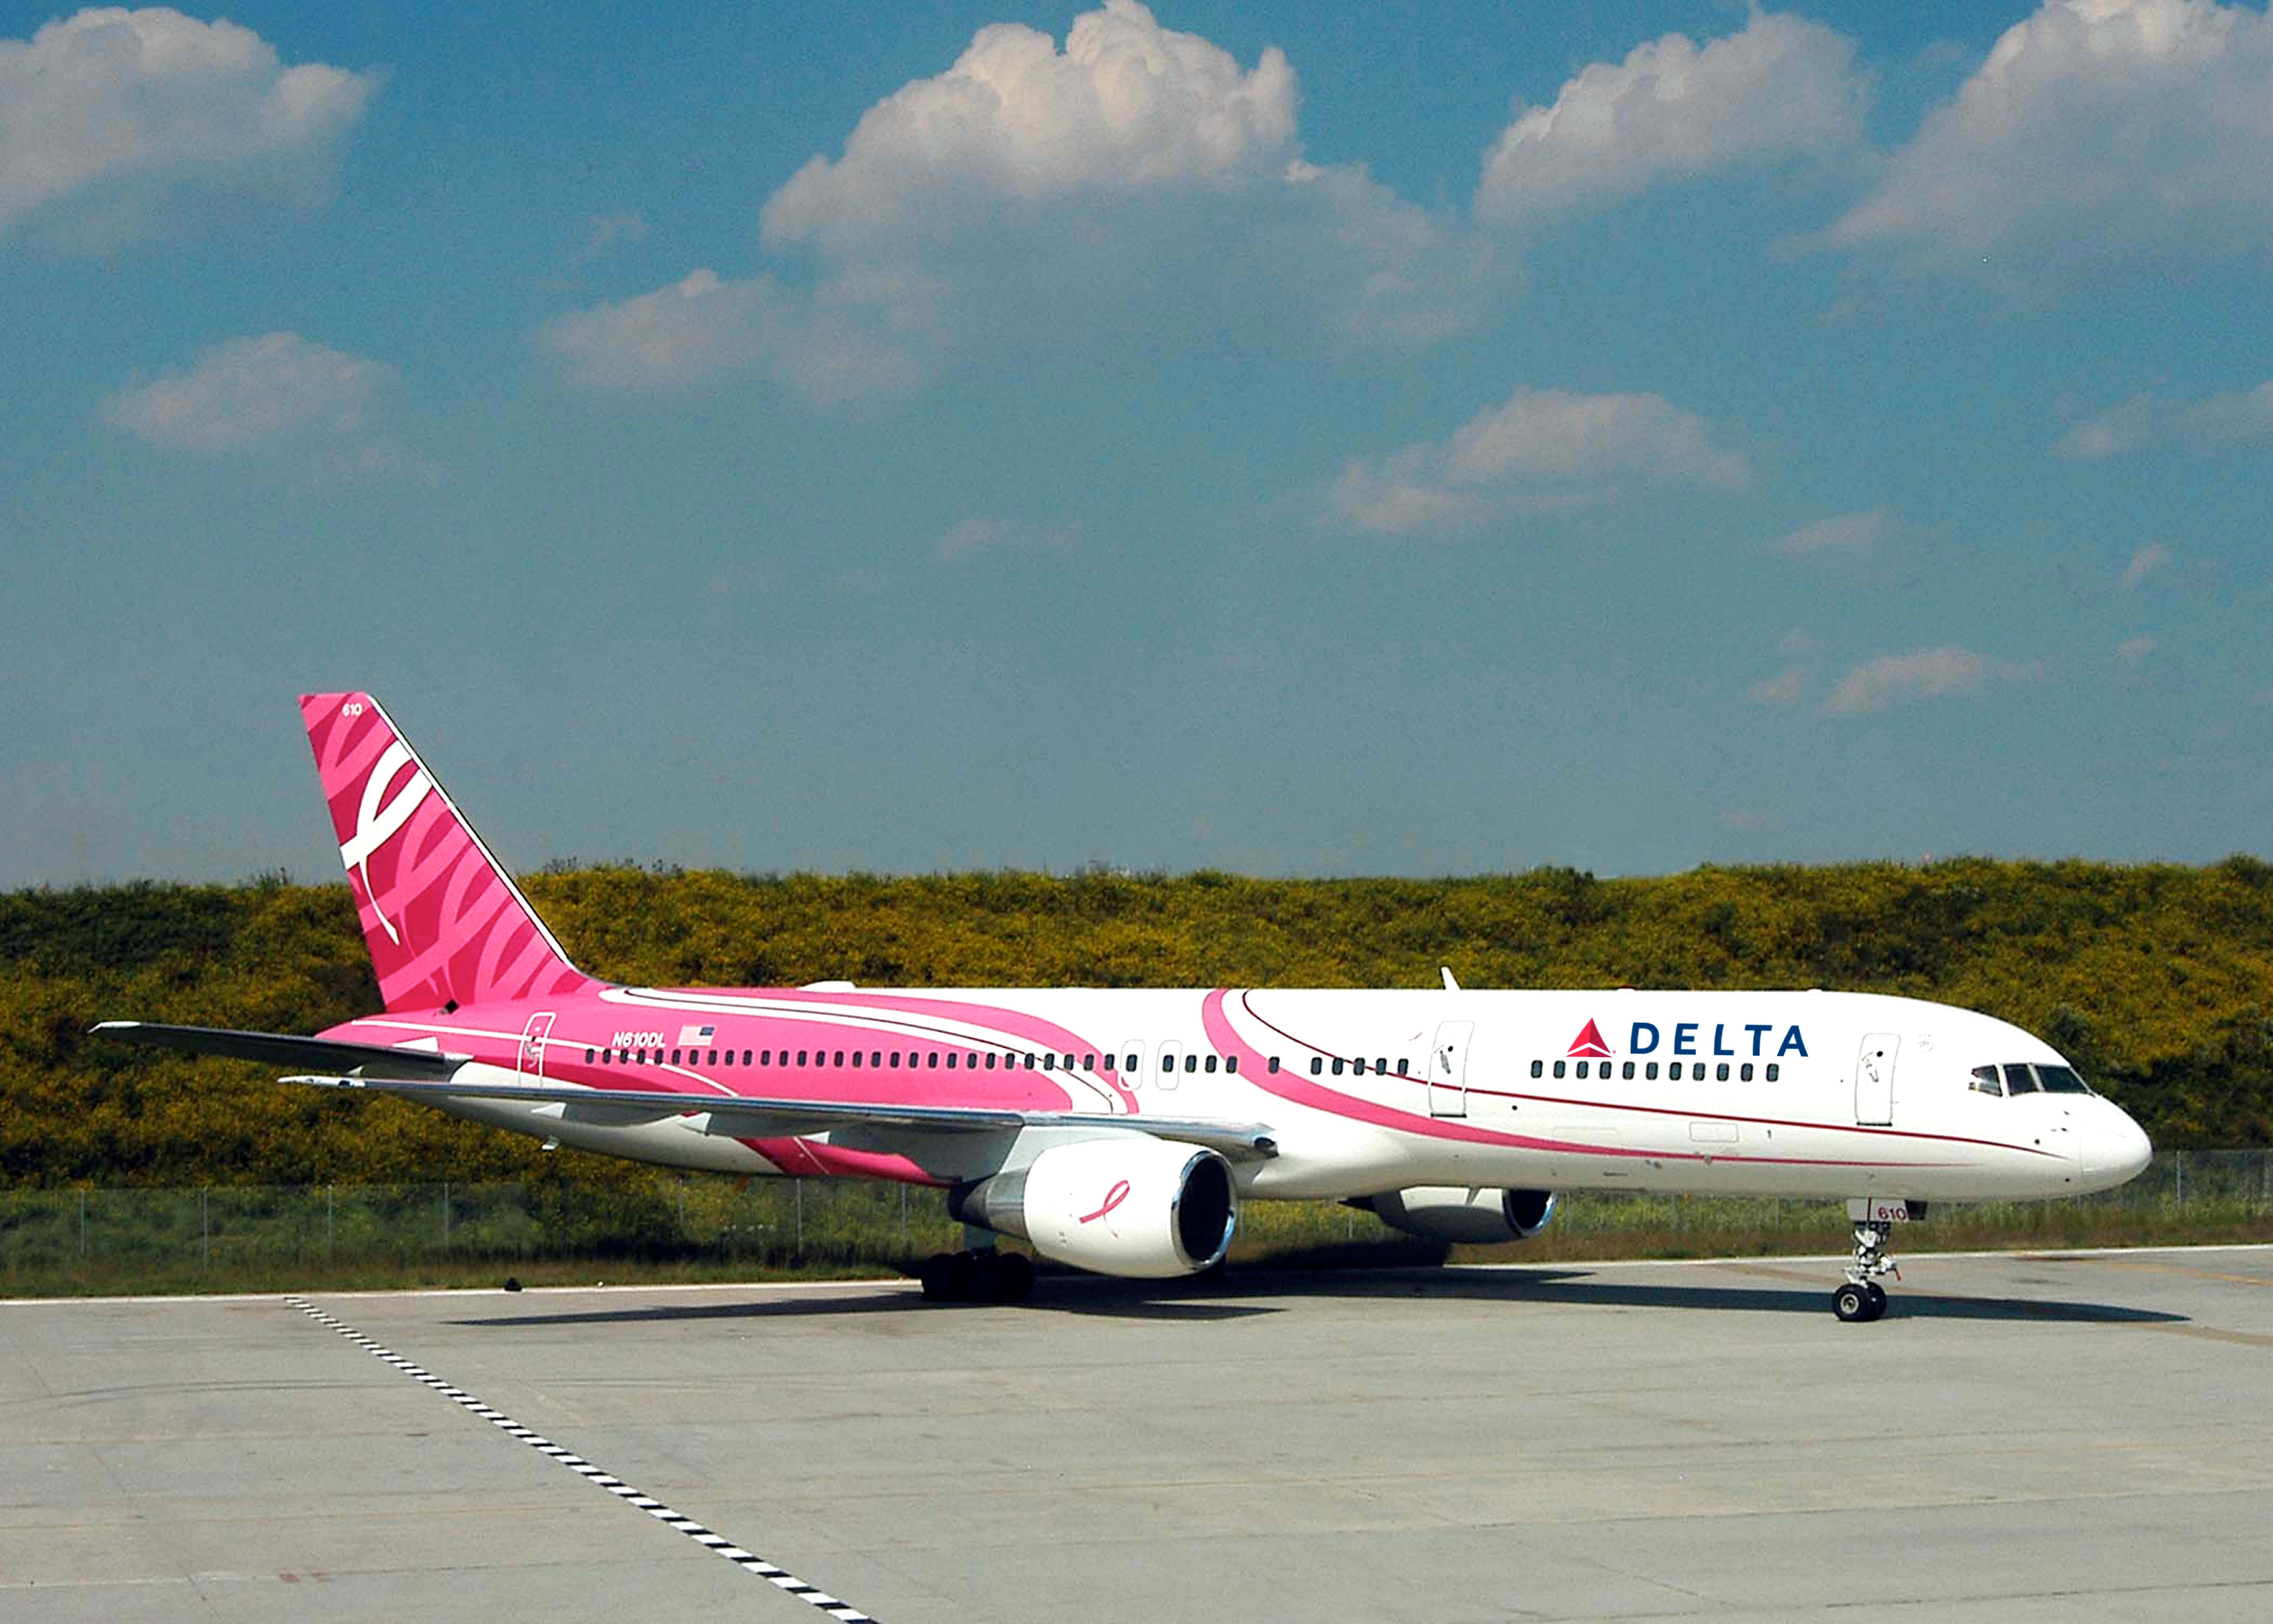 The Delta Pink Plane